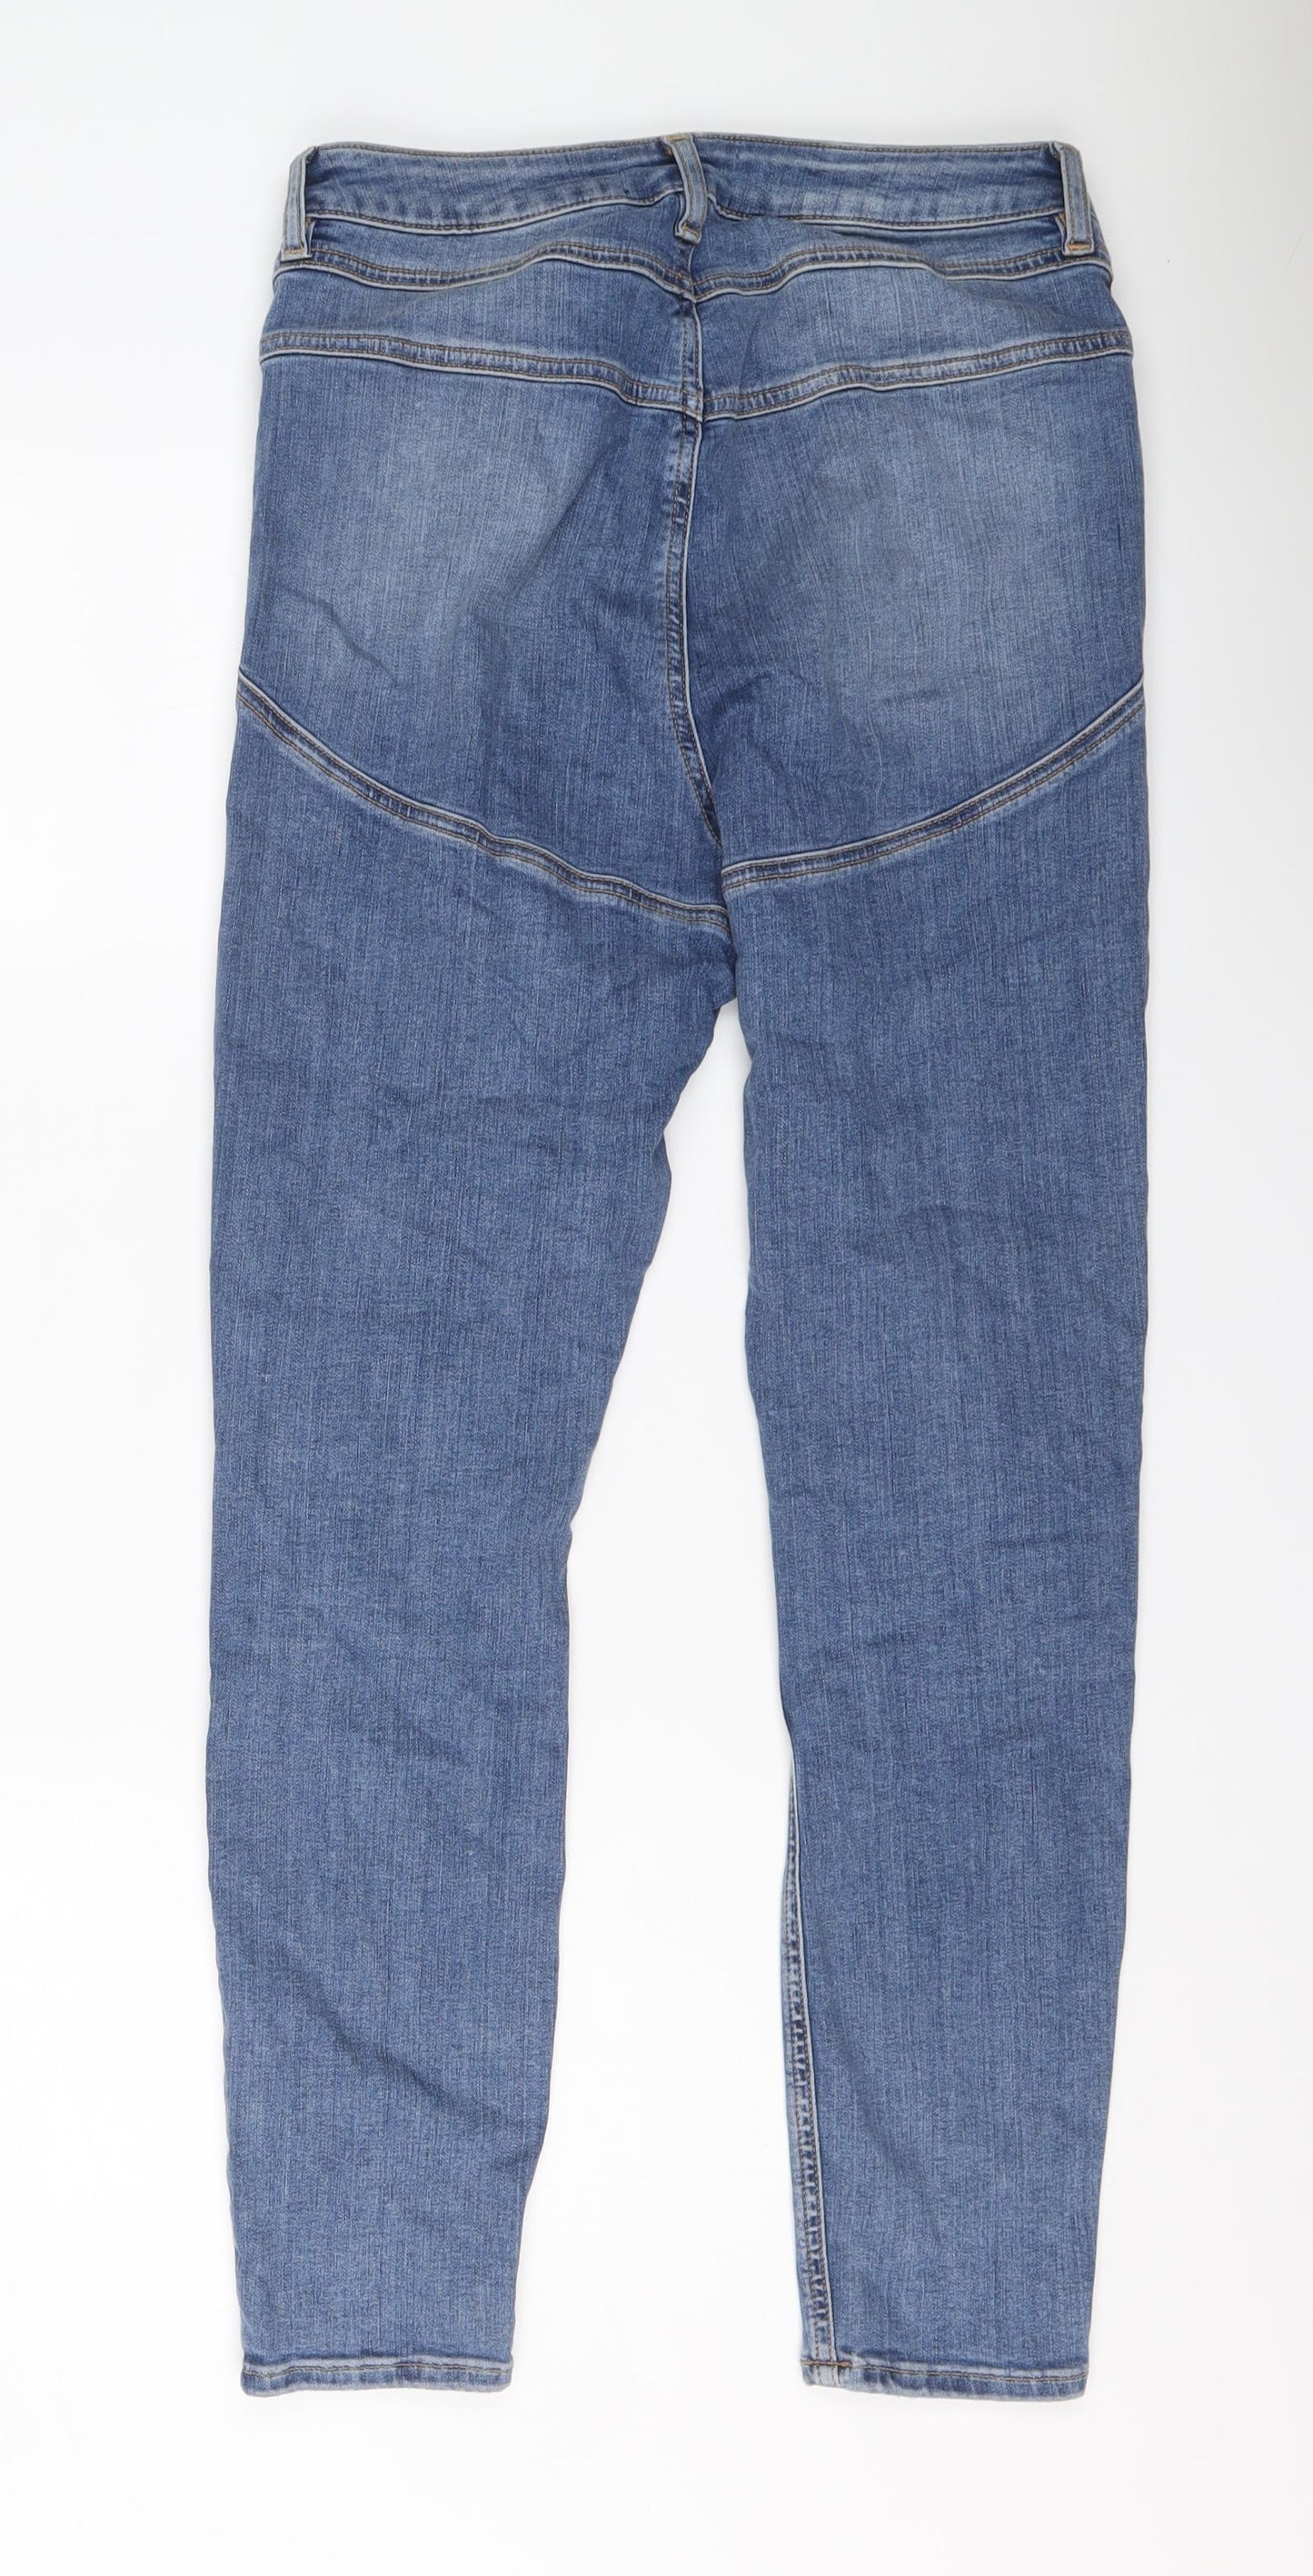 ASOS Womens Blue Cotton Skinny Jeans Size 30 in L32 in Regular Button